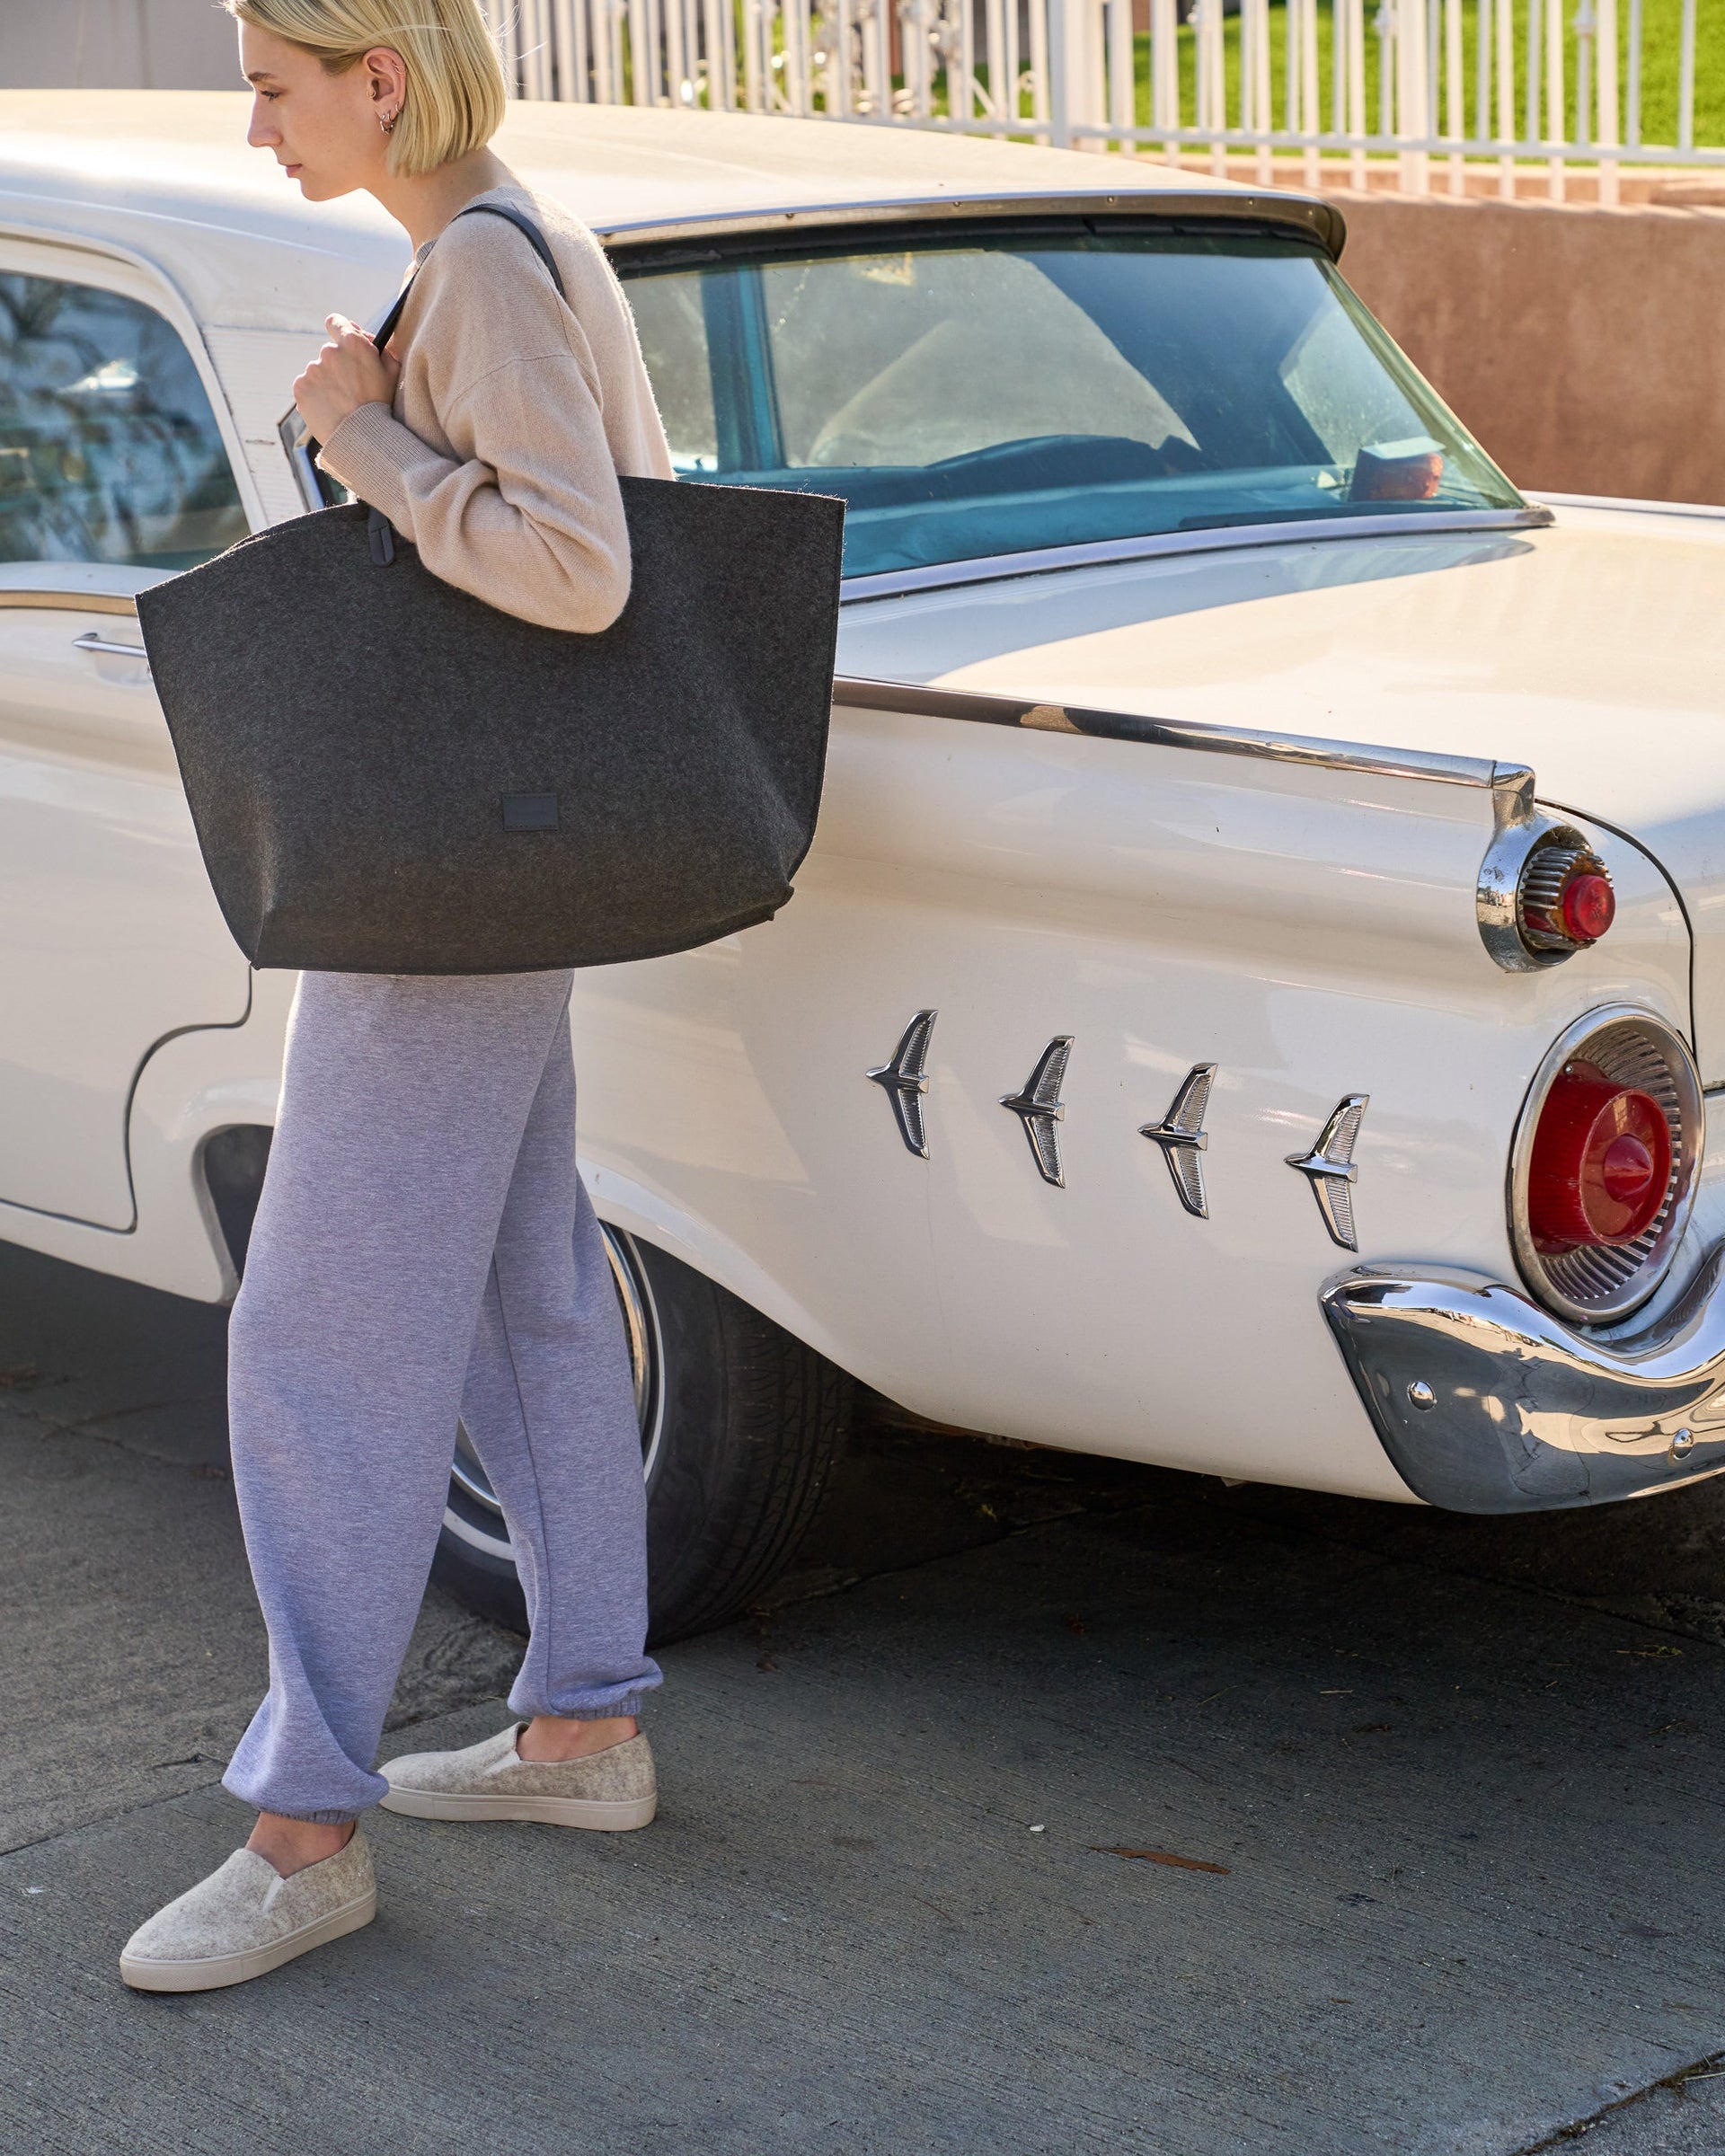 A woman carries a Hana Merino Wool Felt Boat Bag over her shoulder standing in front of a classic car